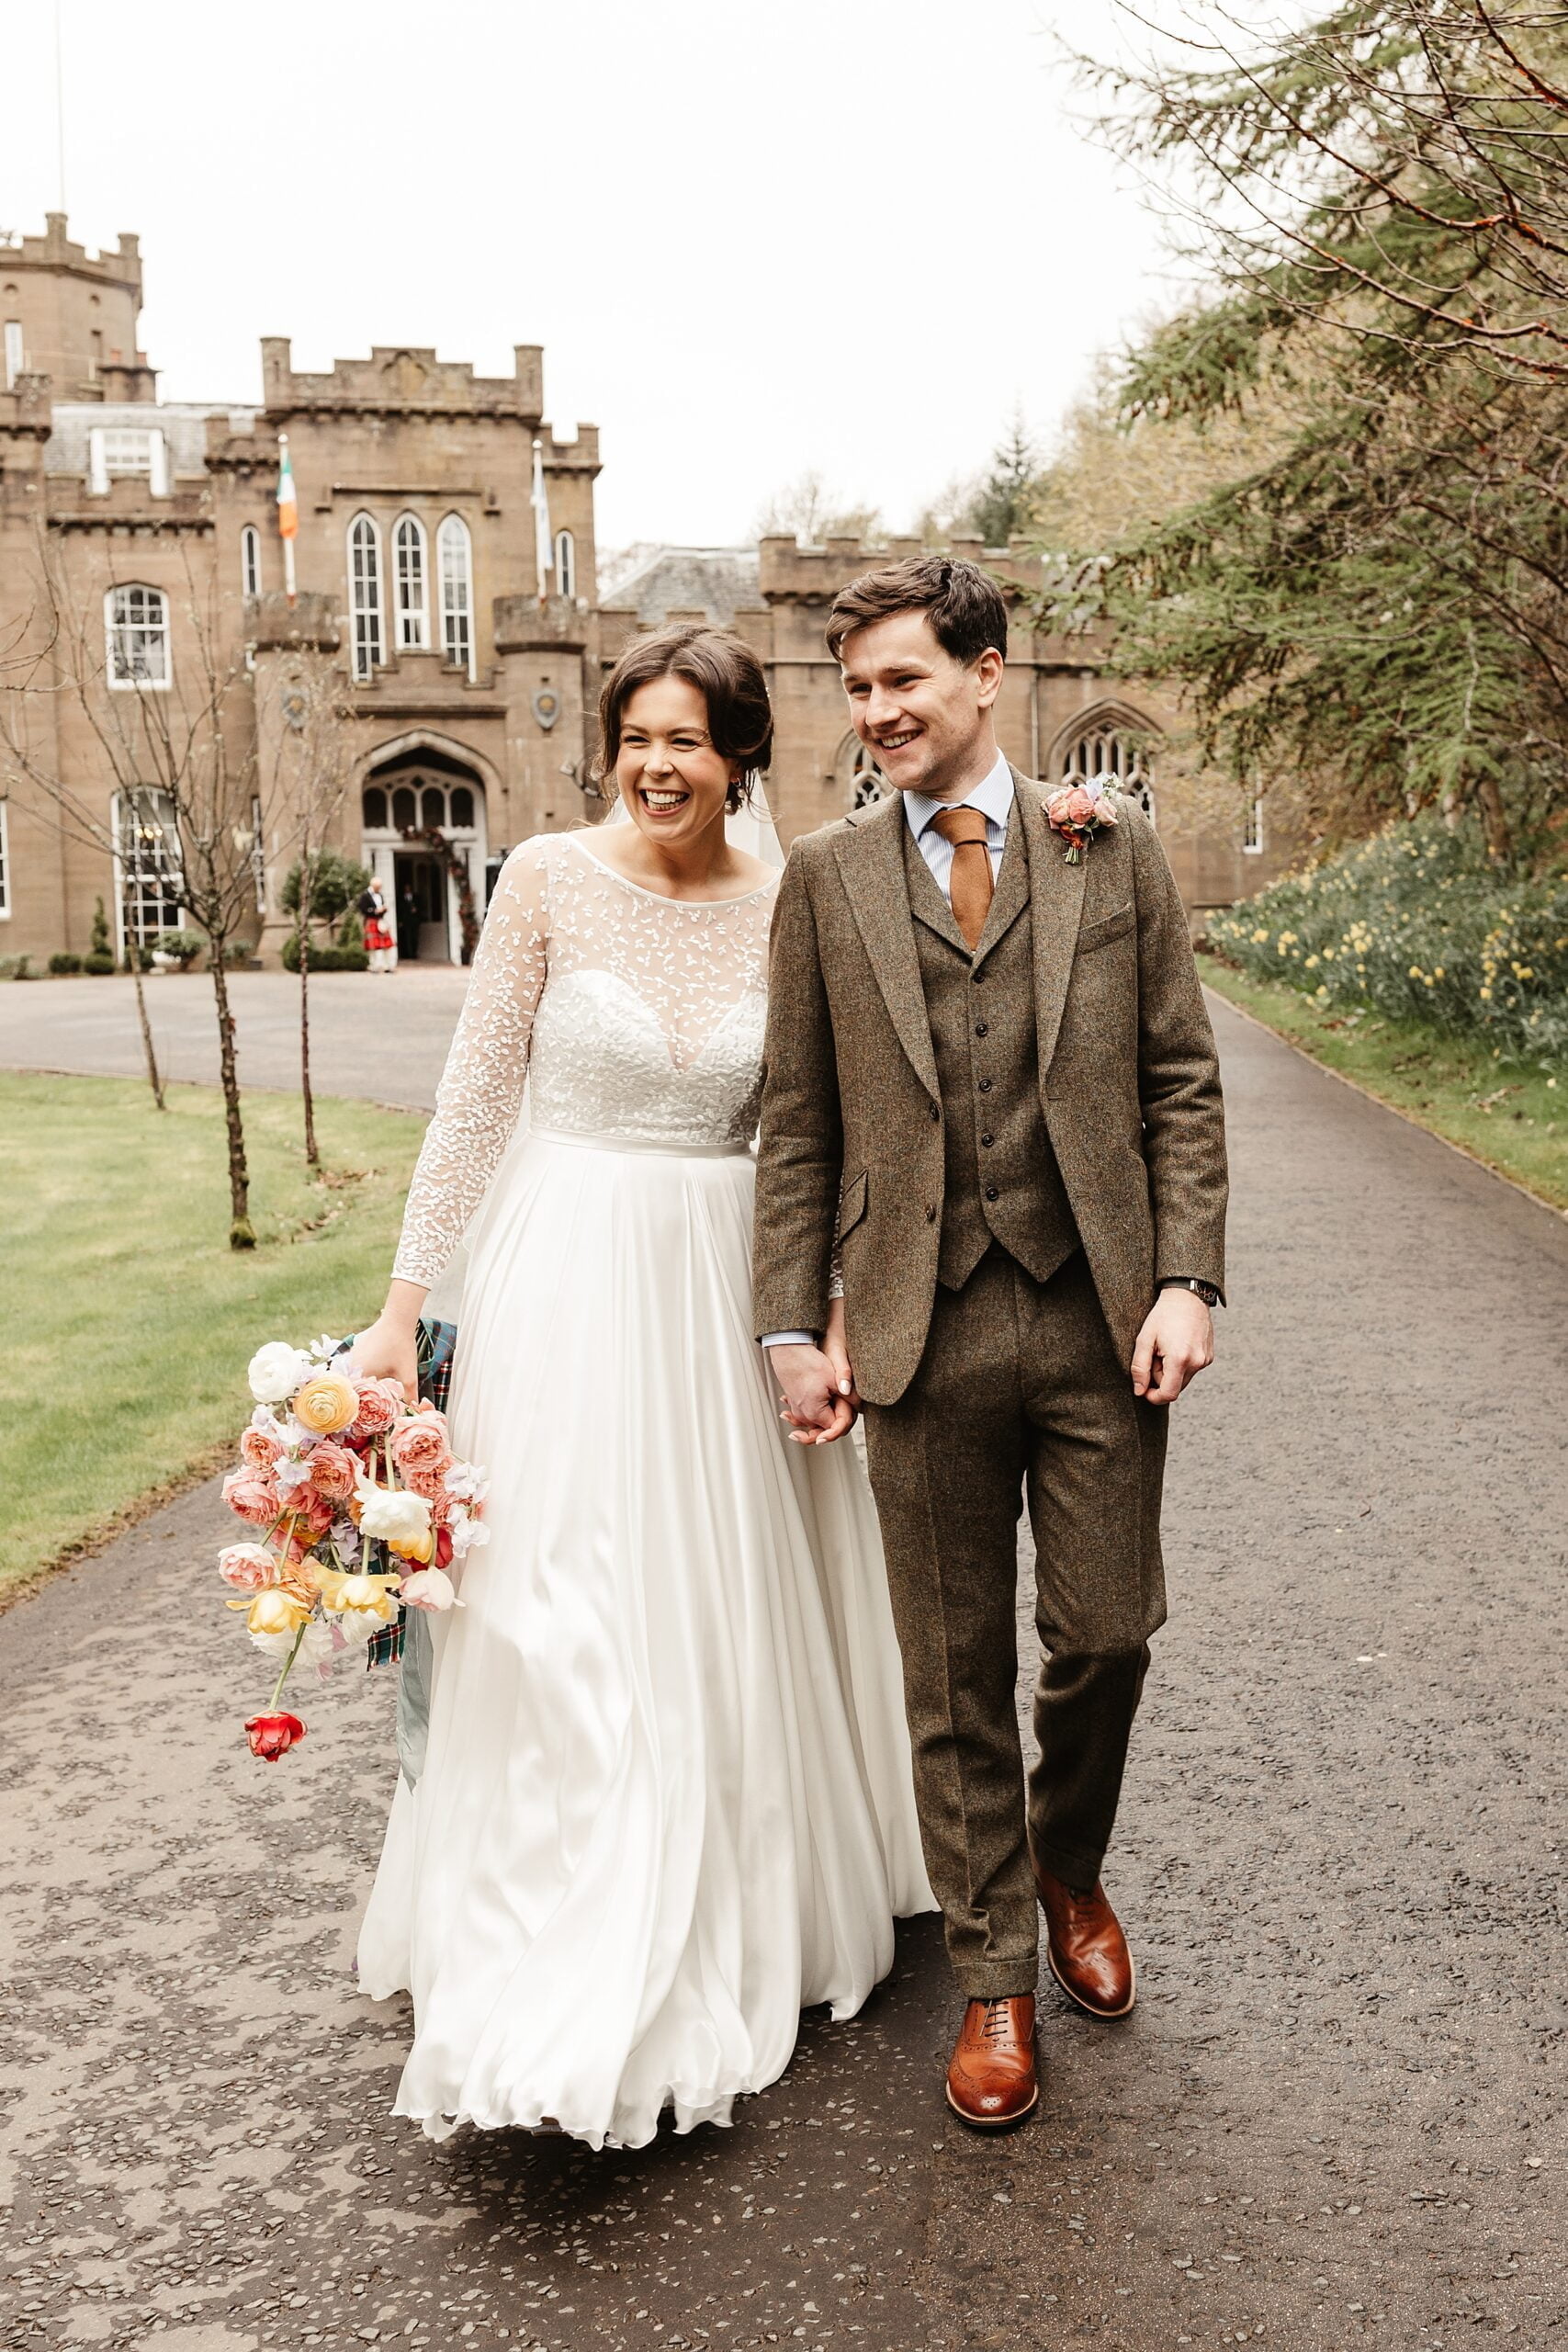 drumtochty castle bride and groom portraits couple photos outdoors sassi holford dress walker slater suit